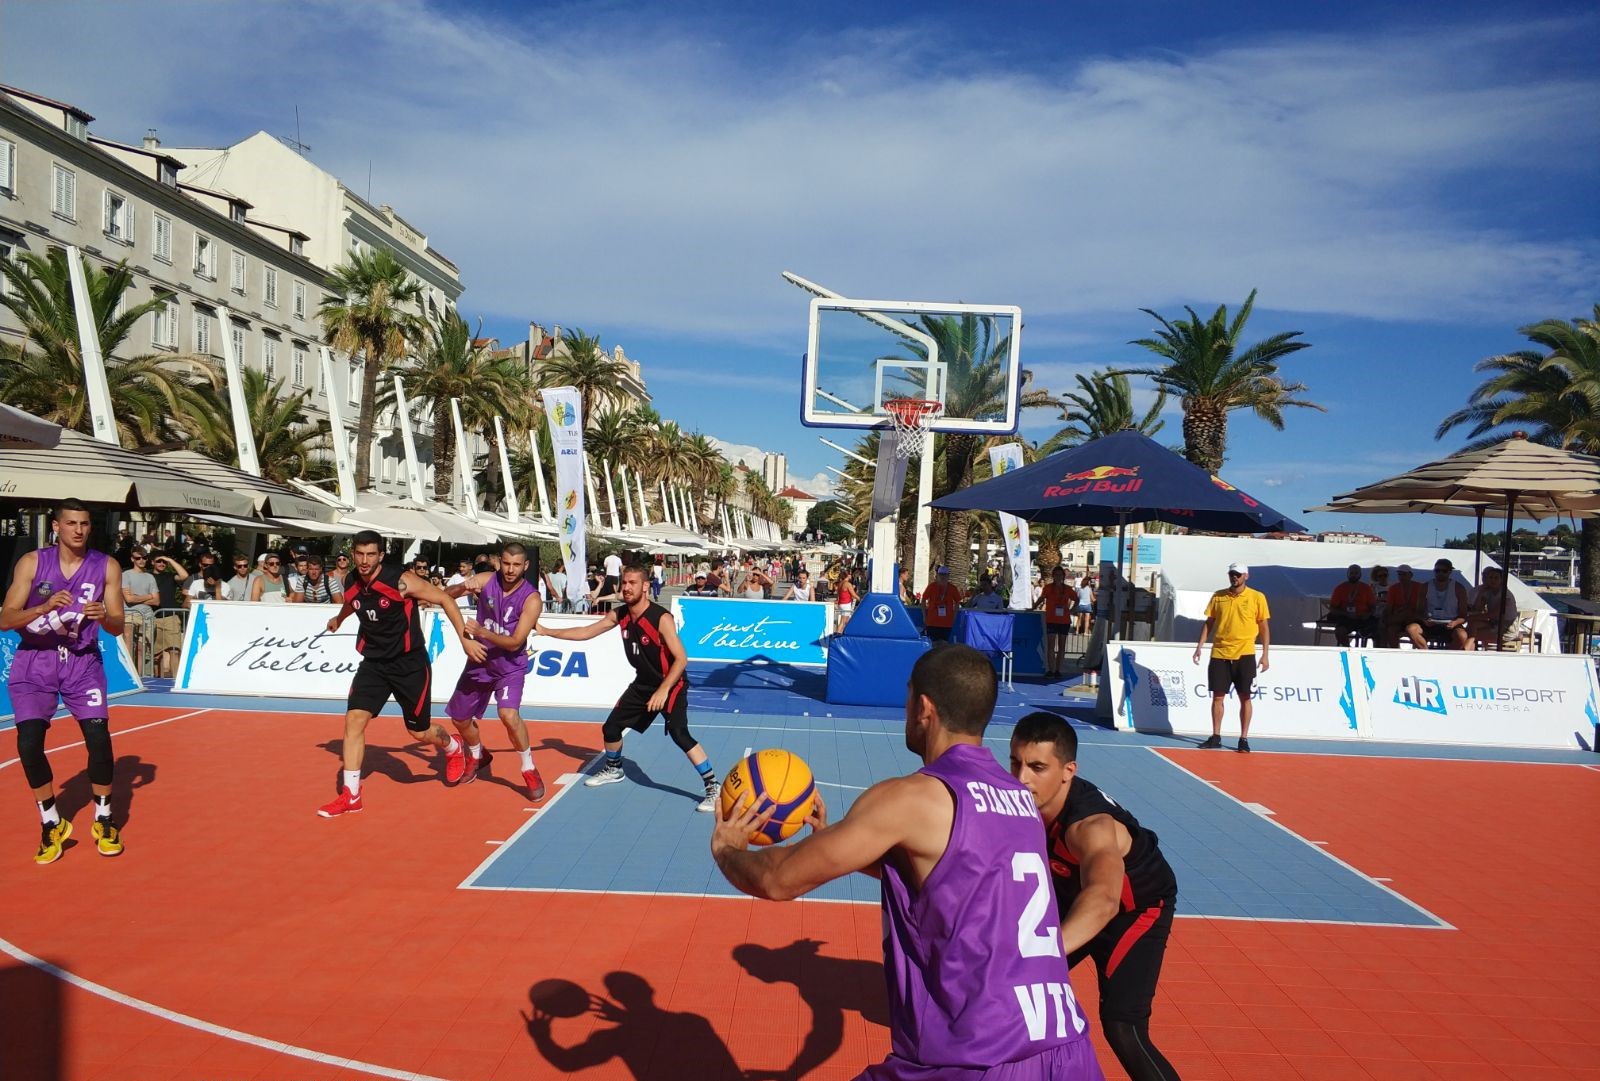 Middle East Technical University 3x3 Court